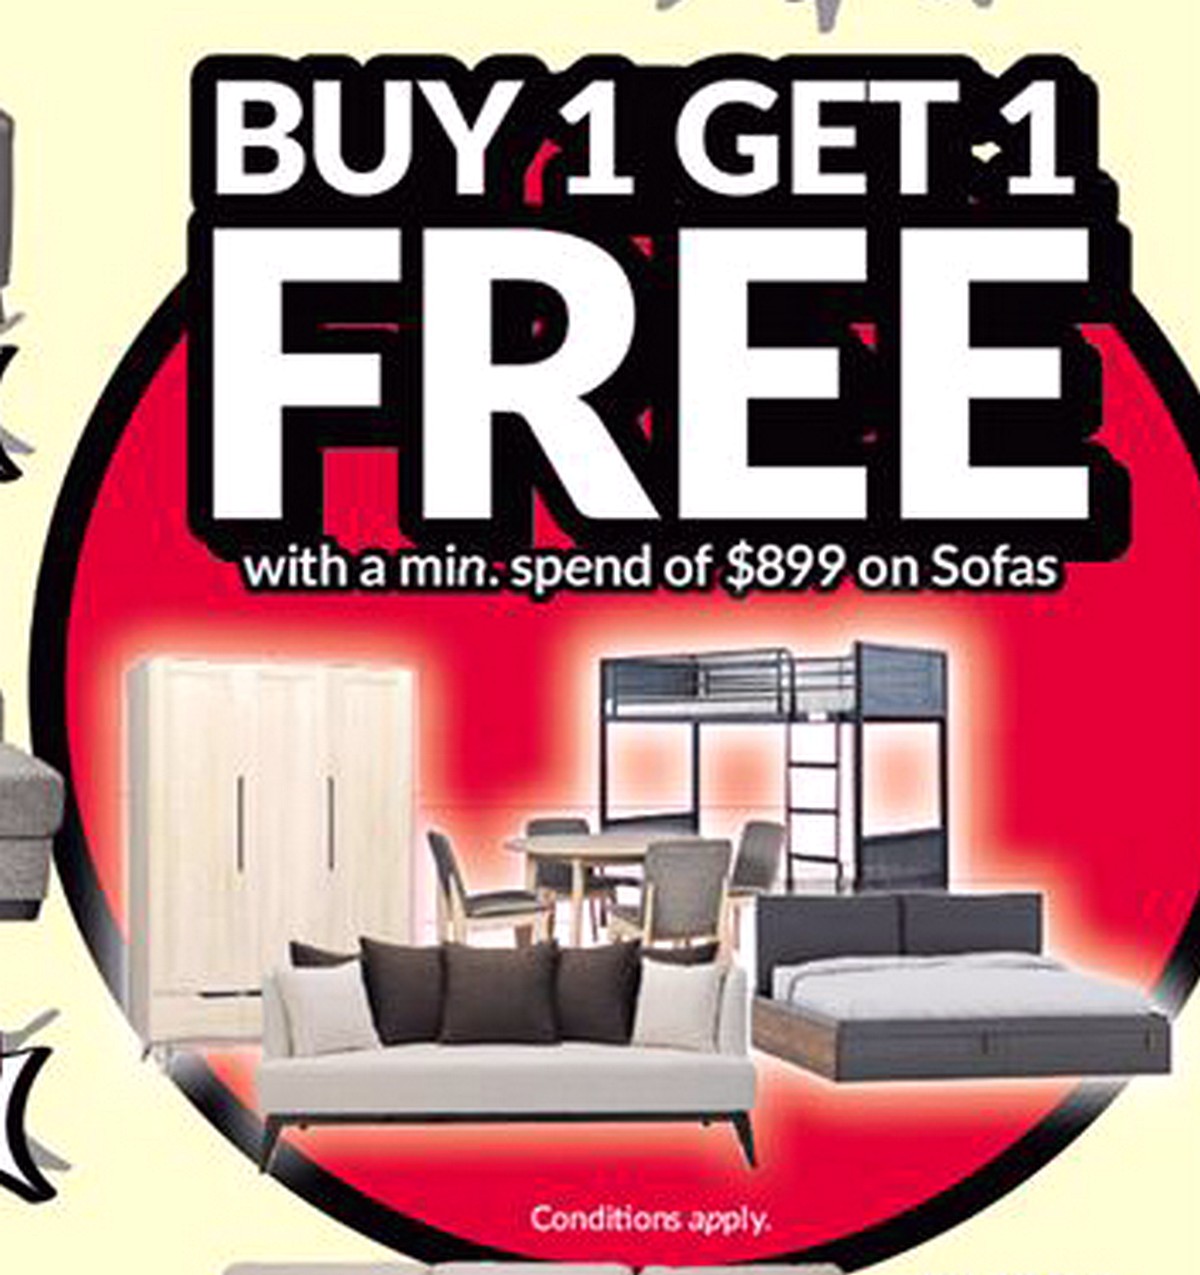 Courts-Warehouse-Sale-Buy-1-FREE-1-Promotion-Singapore-2021 13-17 May 2021: COURTS Massive Furniture & TV Clearance Sale! Up to 65% OFF & Buy 1 Free 1 Deals!